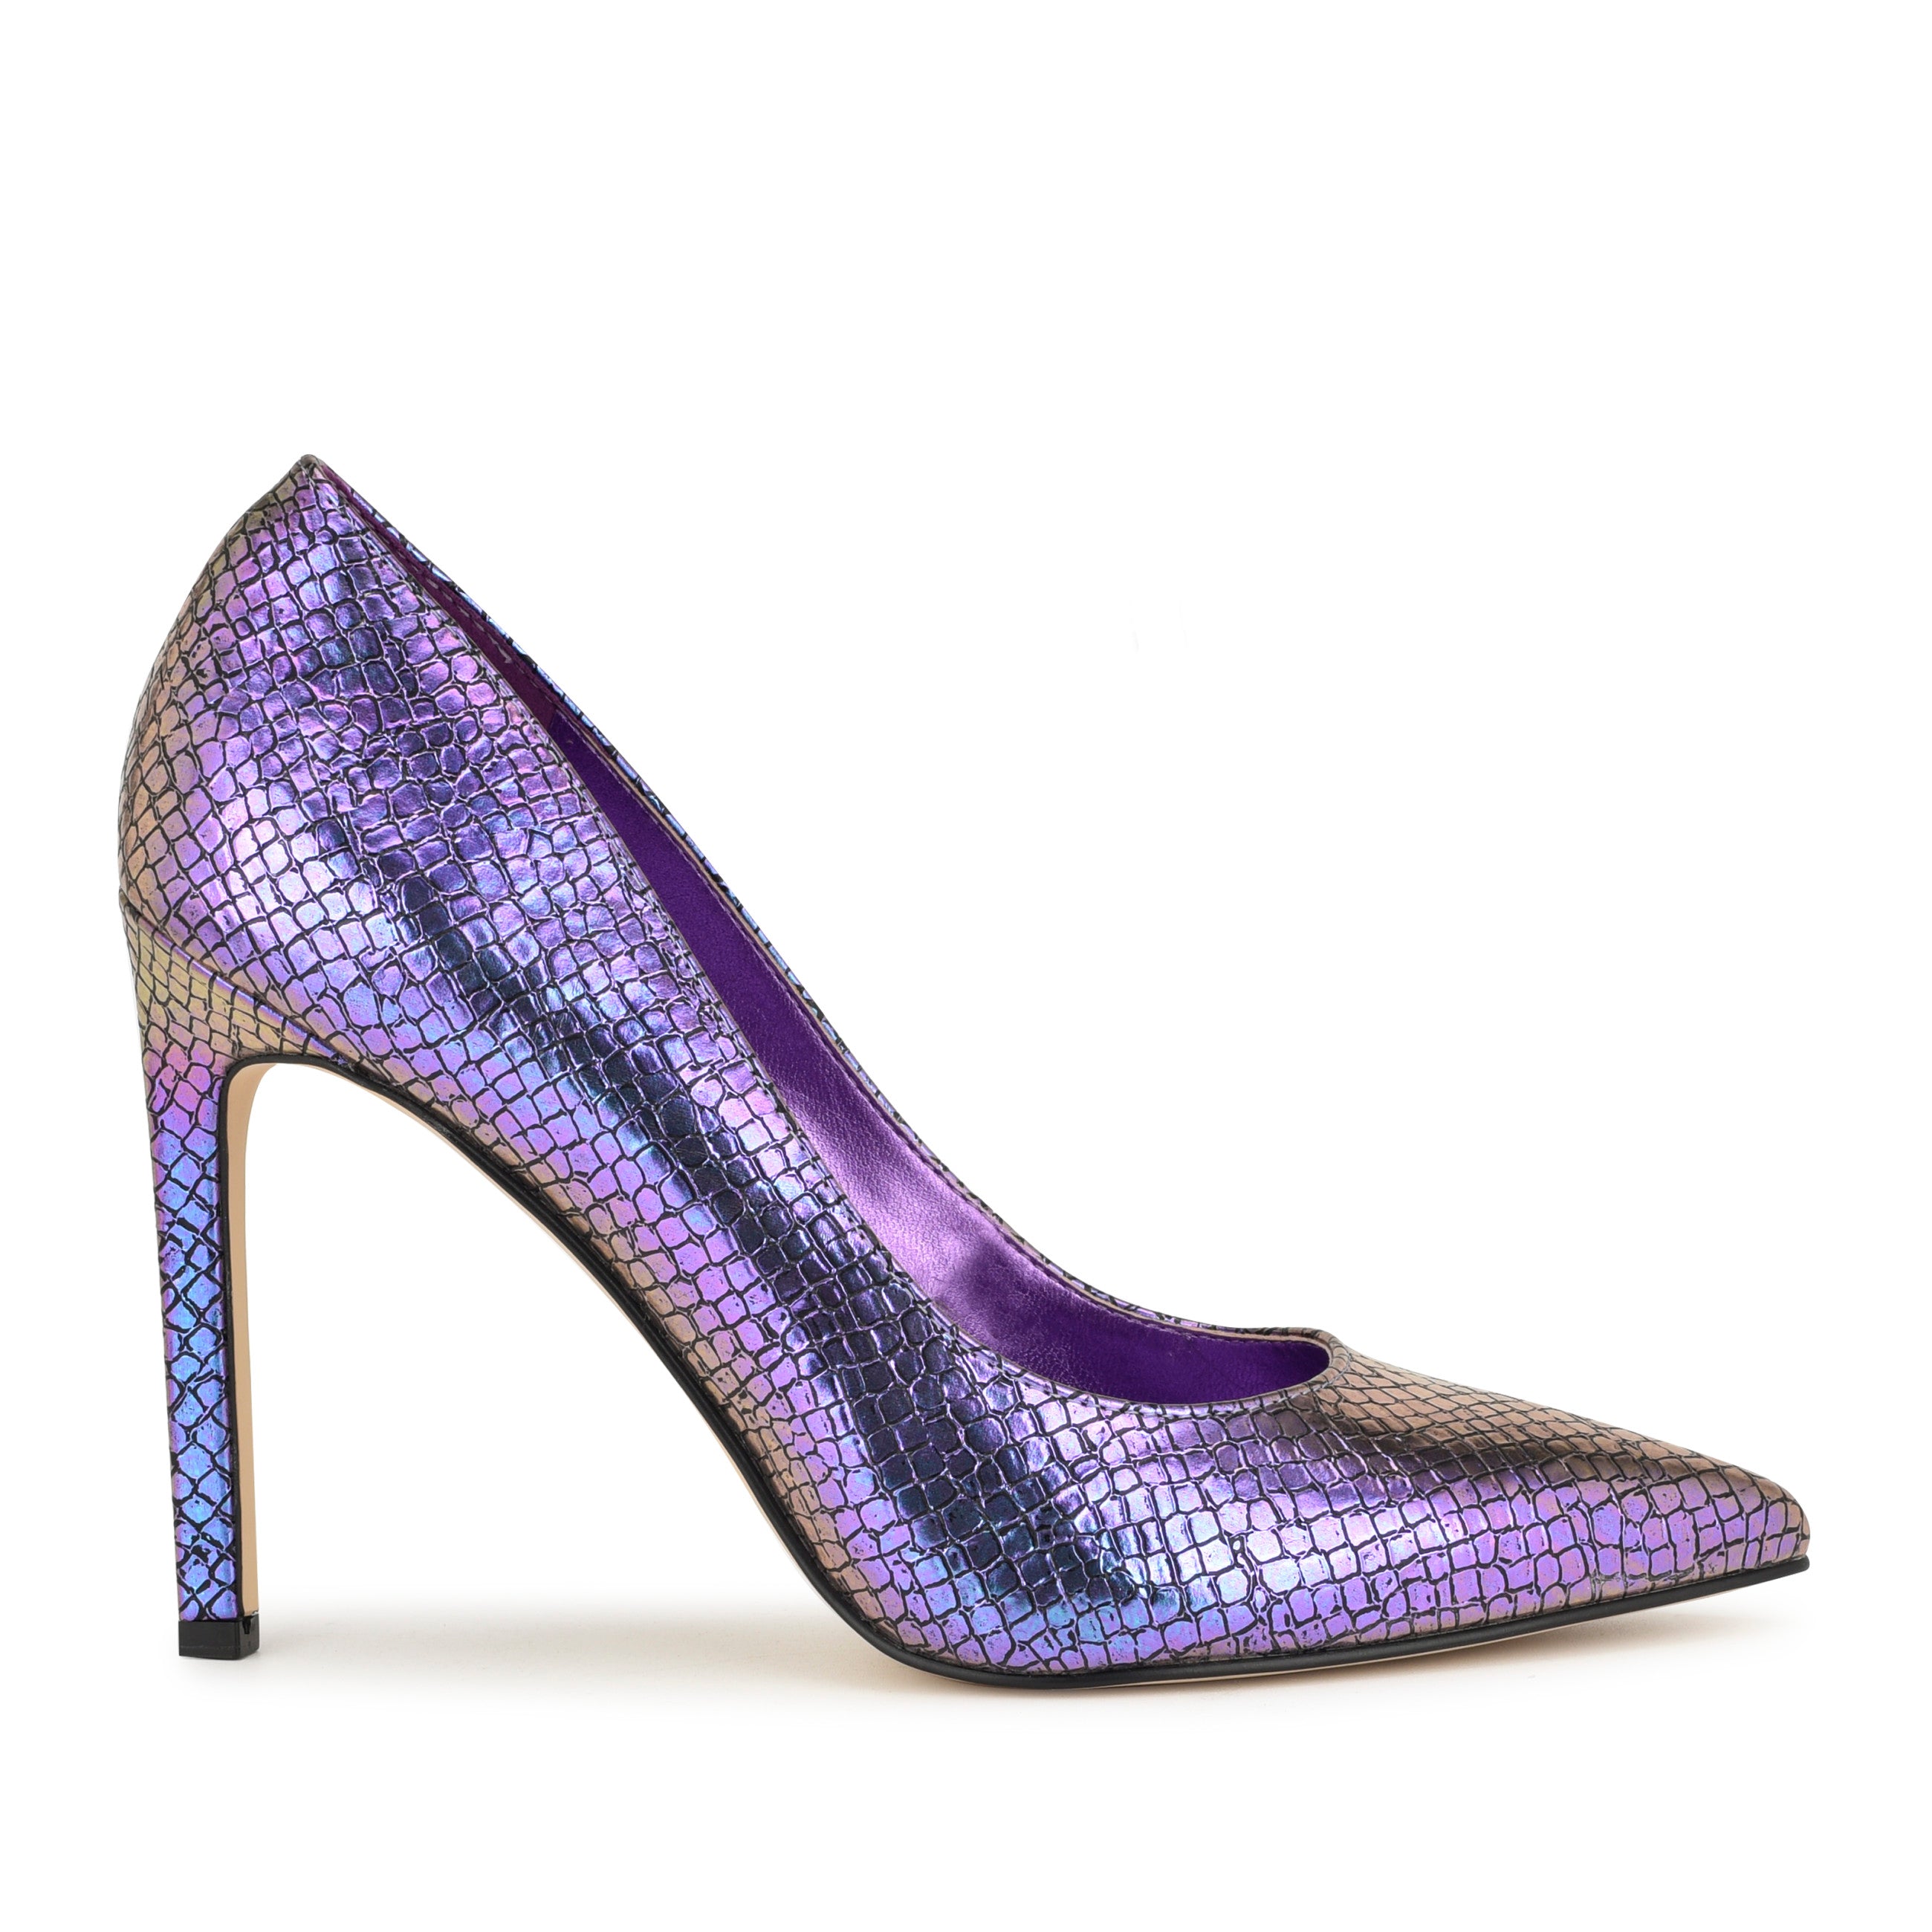 Add A Little Edge To Your Outfit With Snakeskin - The Dark Plum